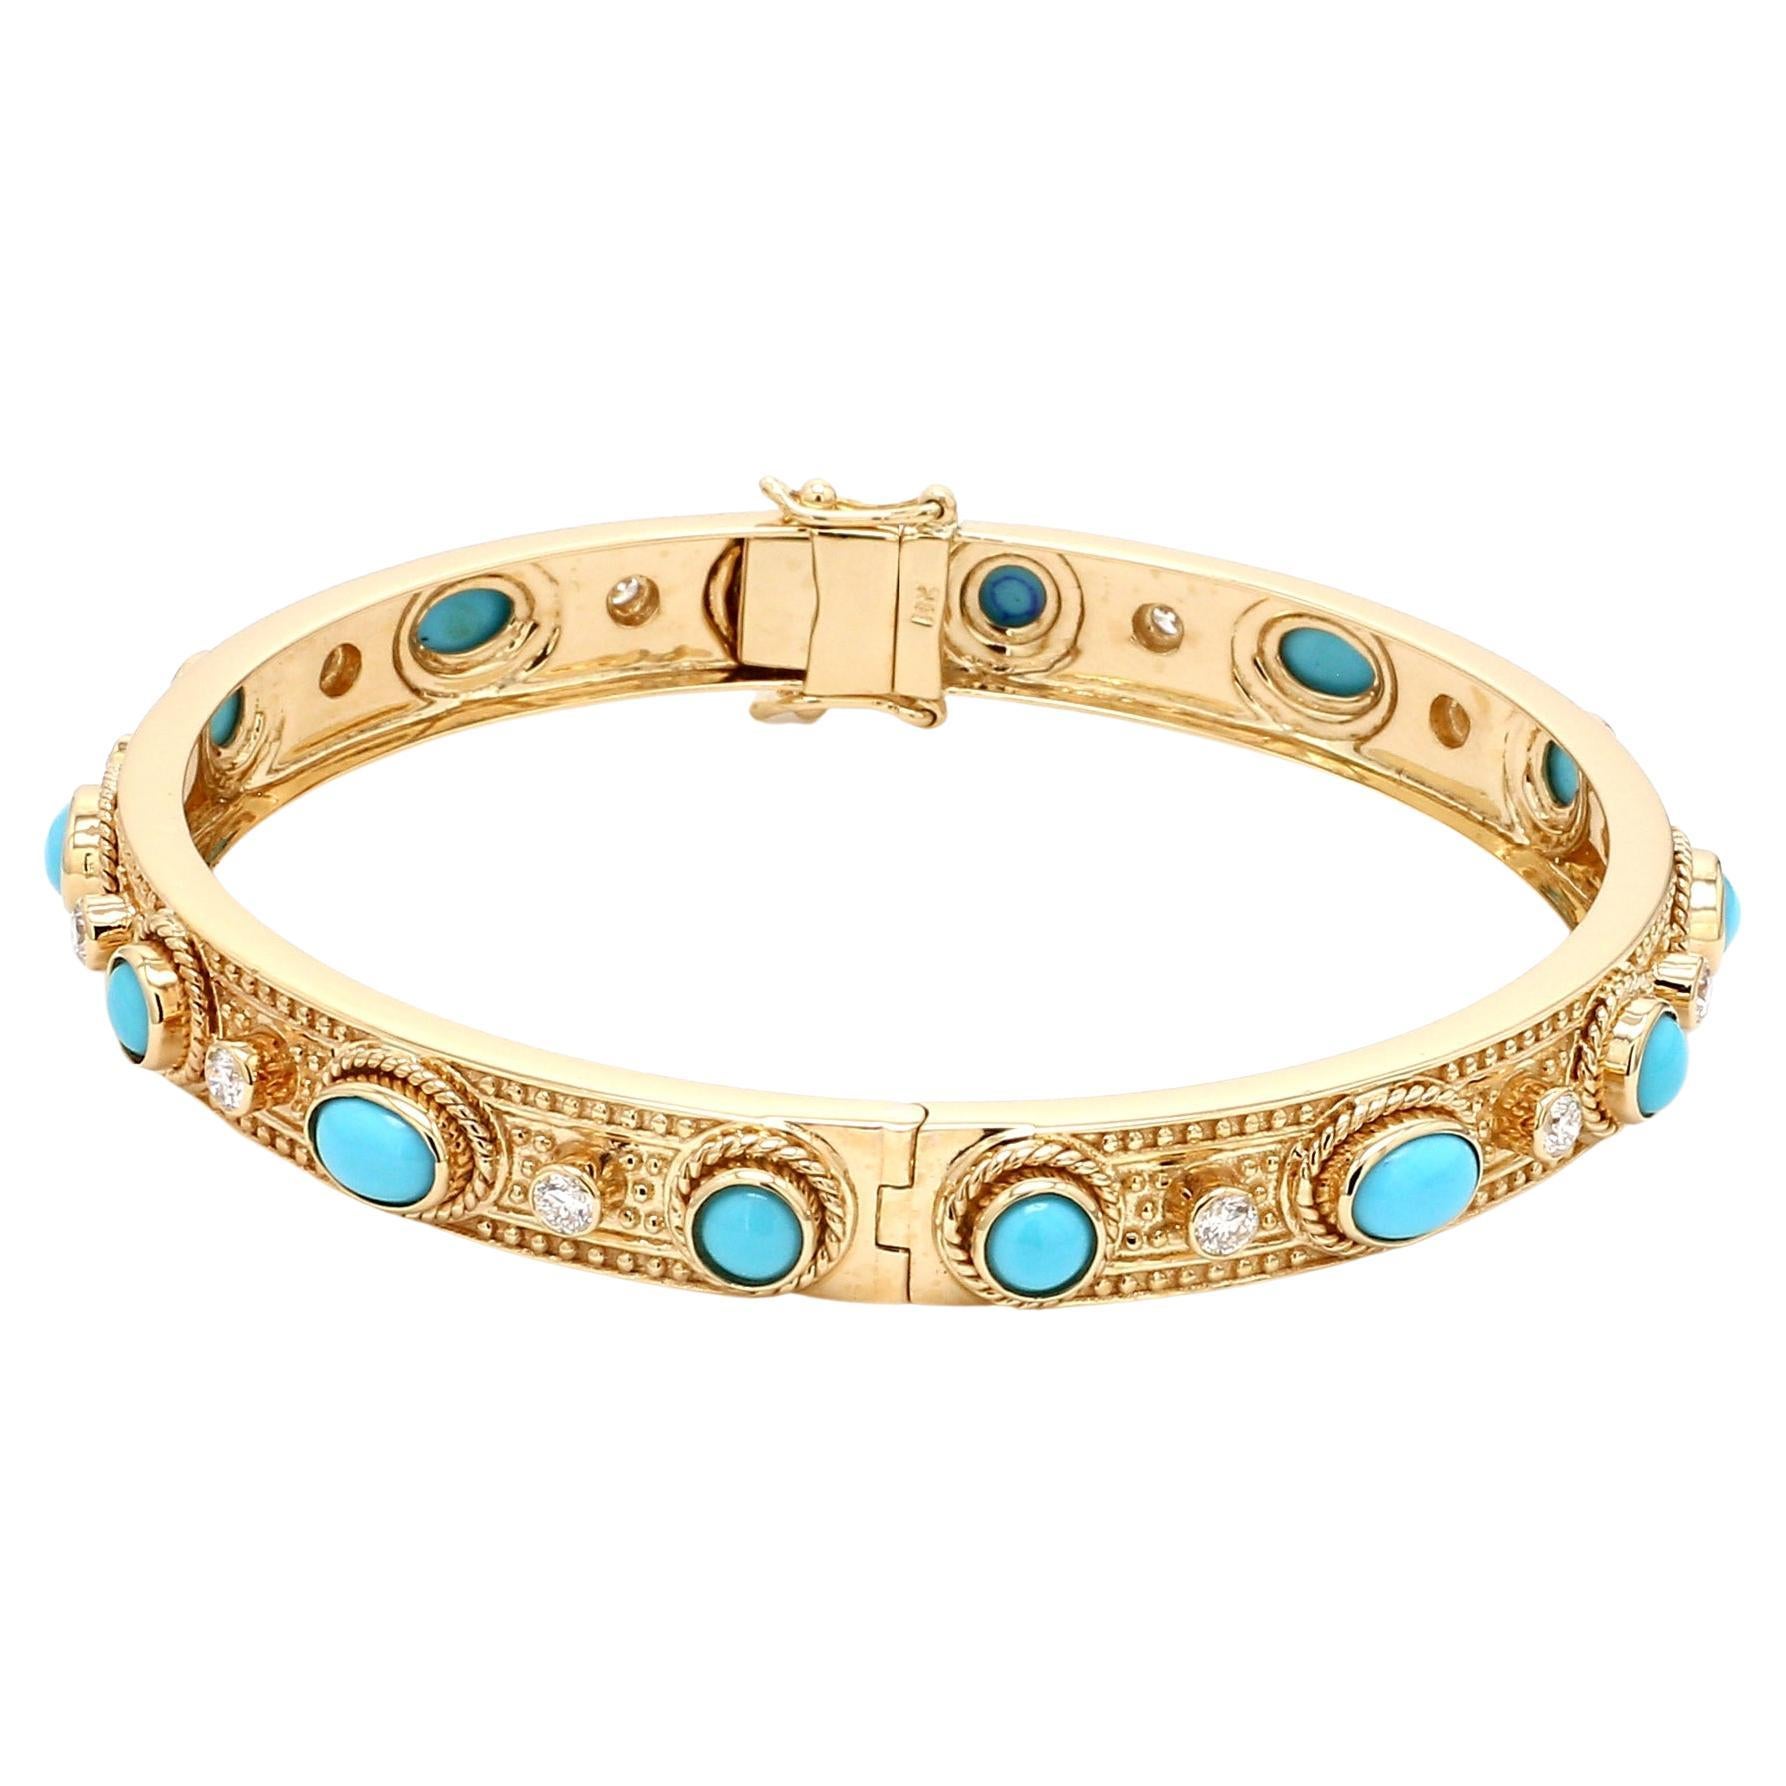 Real Oval Turquoise Gemstone Bracelet Diamond Solid 18k Yellow Gold Fine Jewelry For Sale